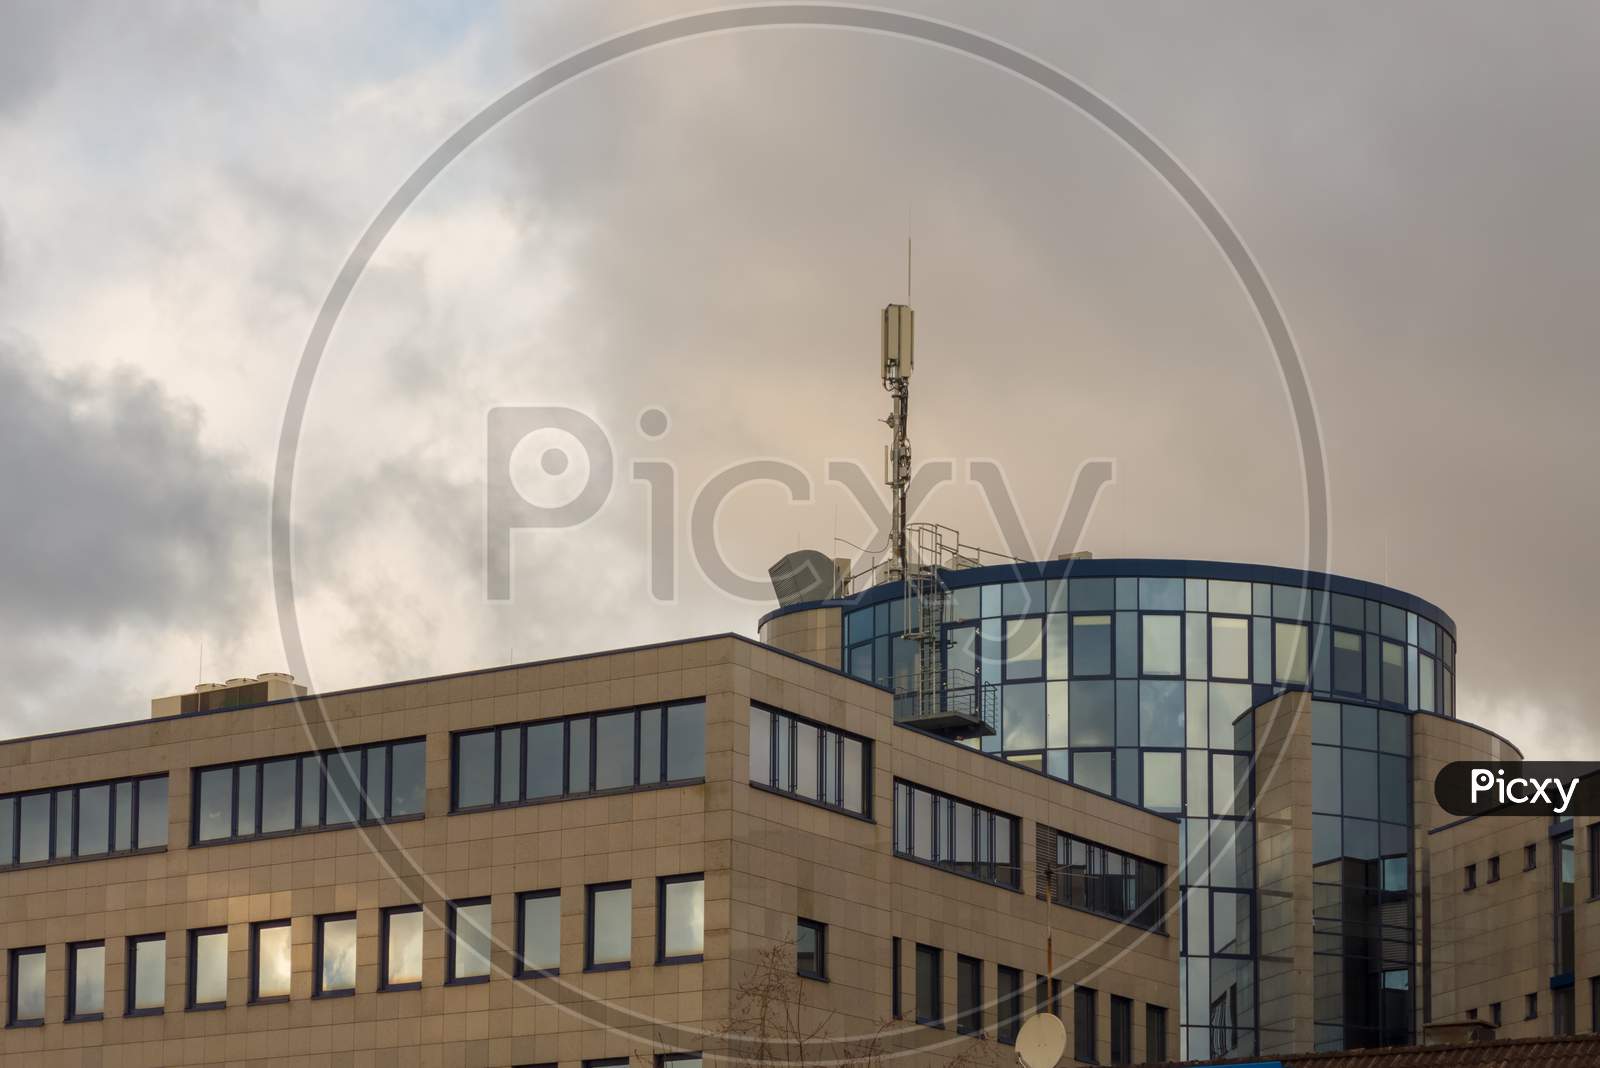 Modern Buildings In A German Town,Shot From A Public Place